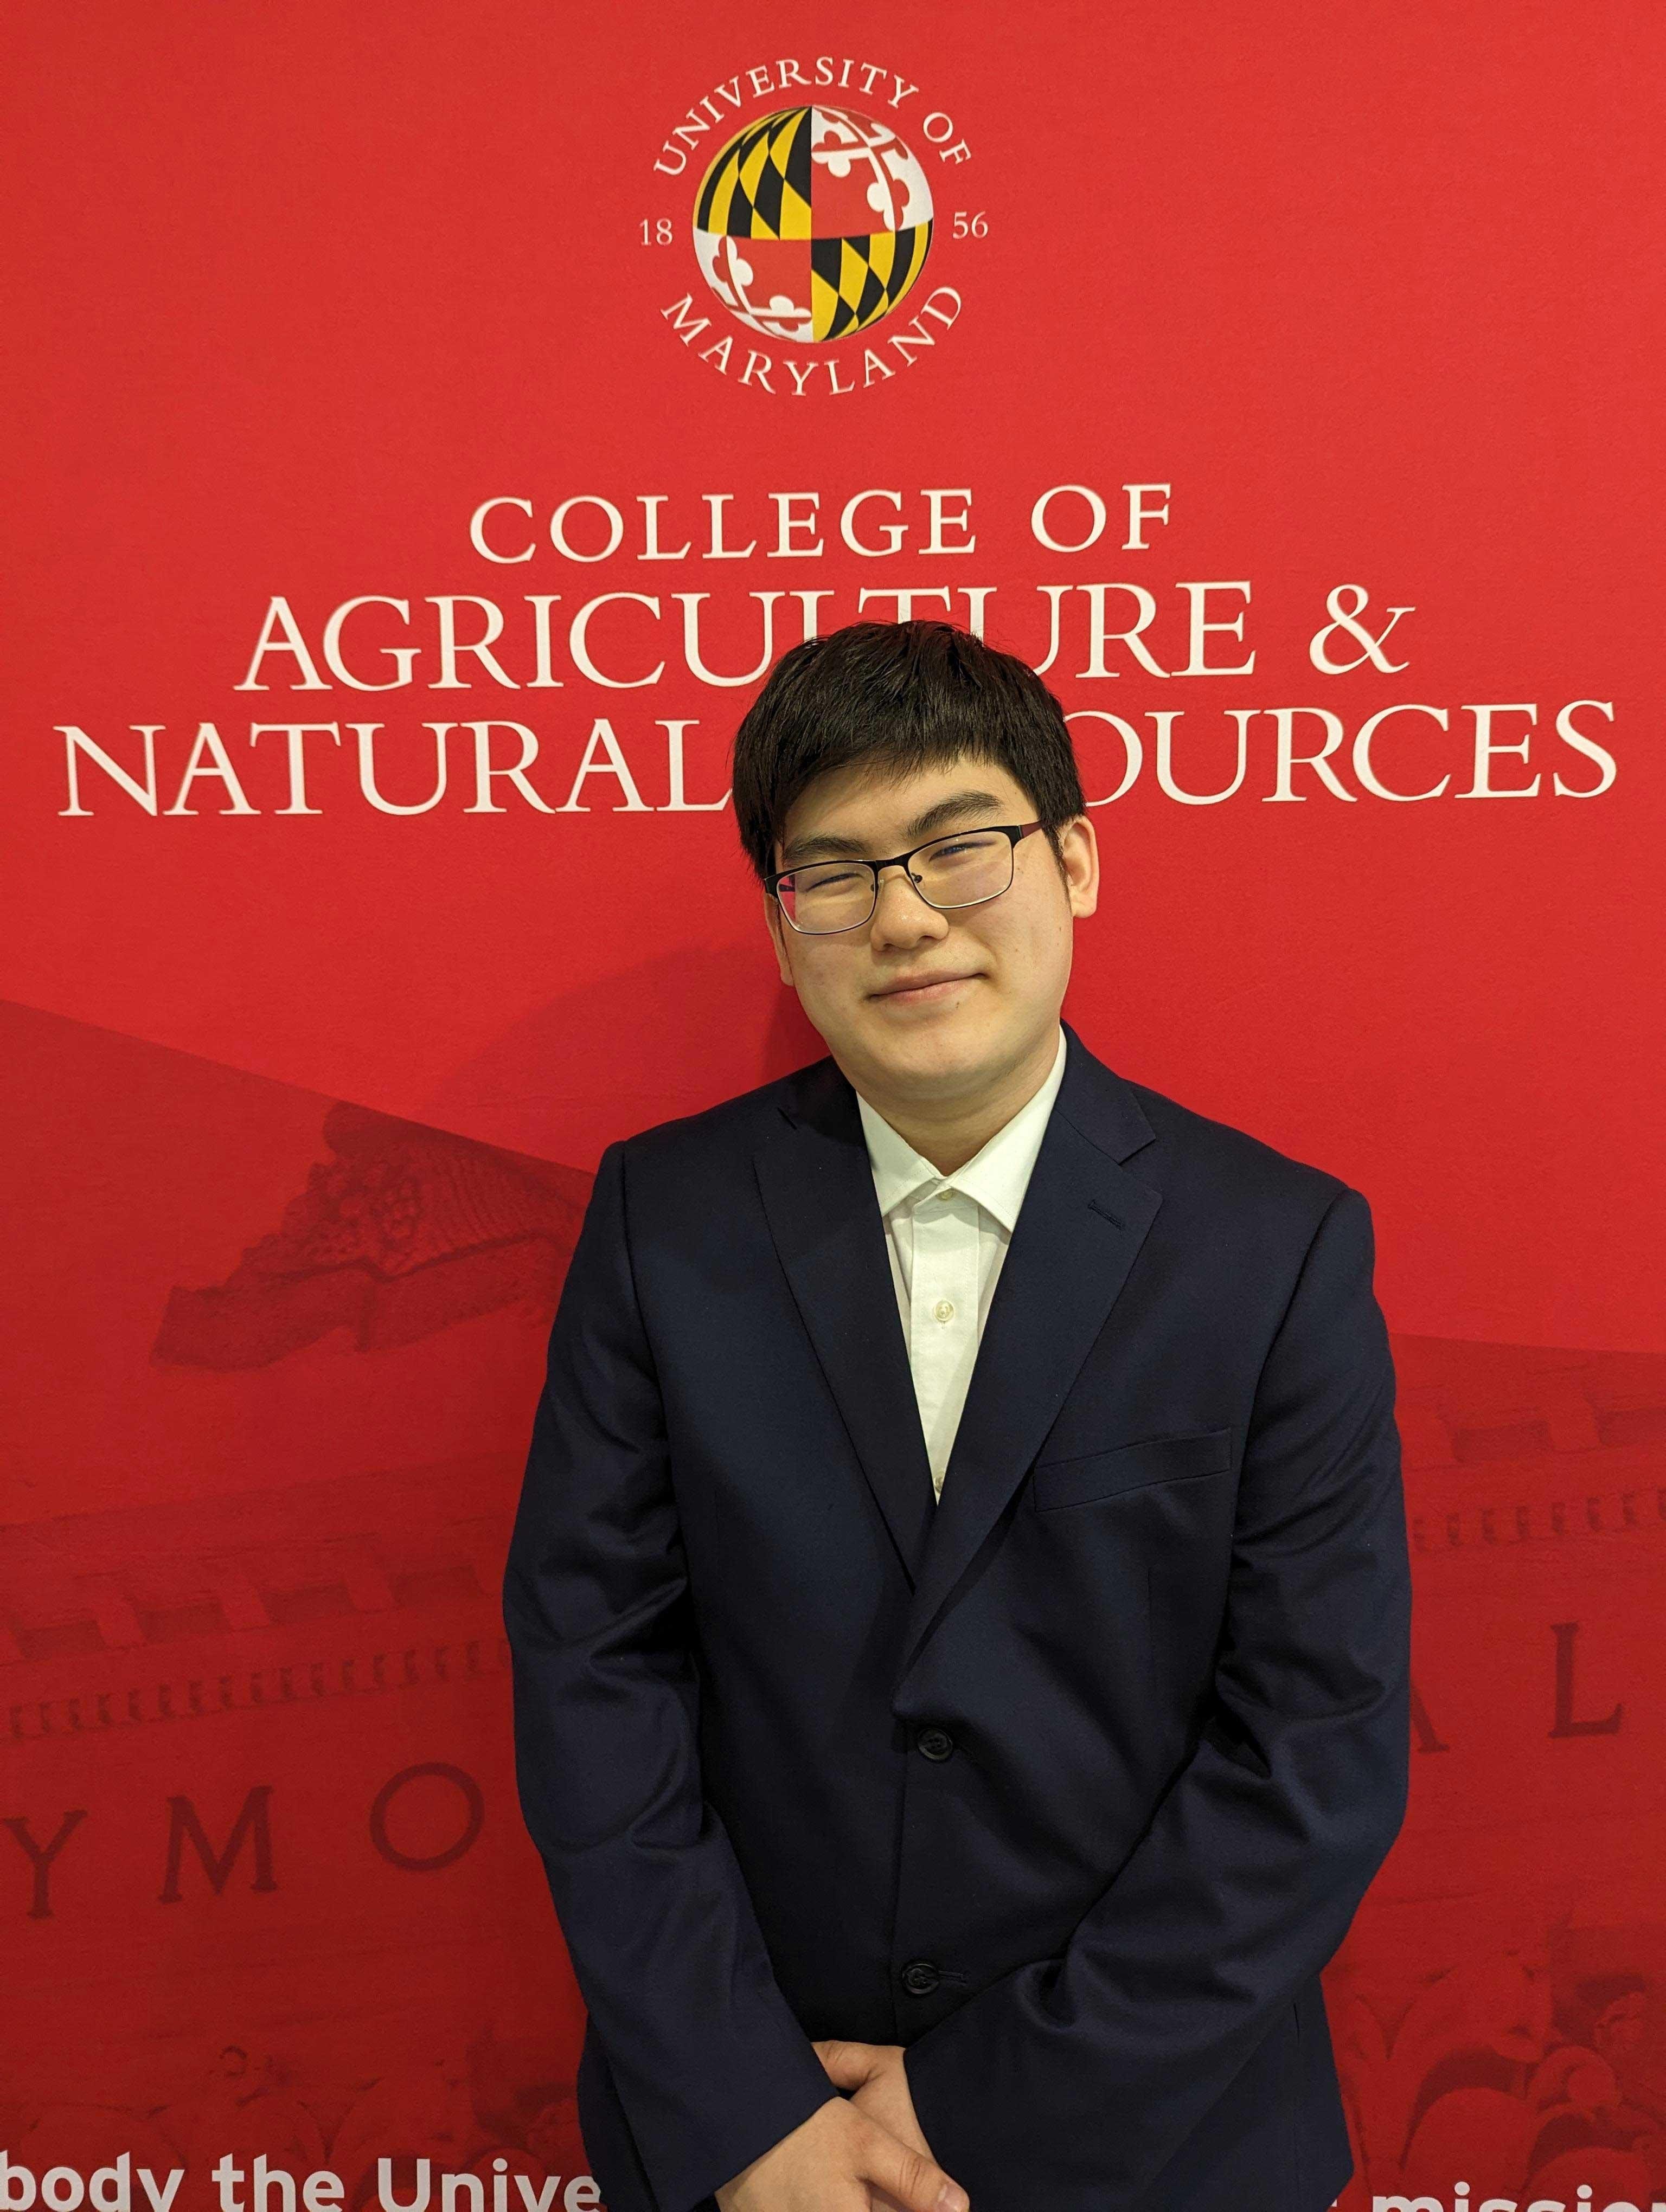 Proud student awardee standing in front of College of Agriculture and Natural Resources backdrop.